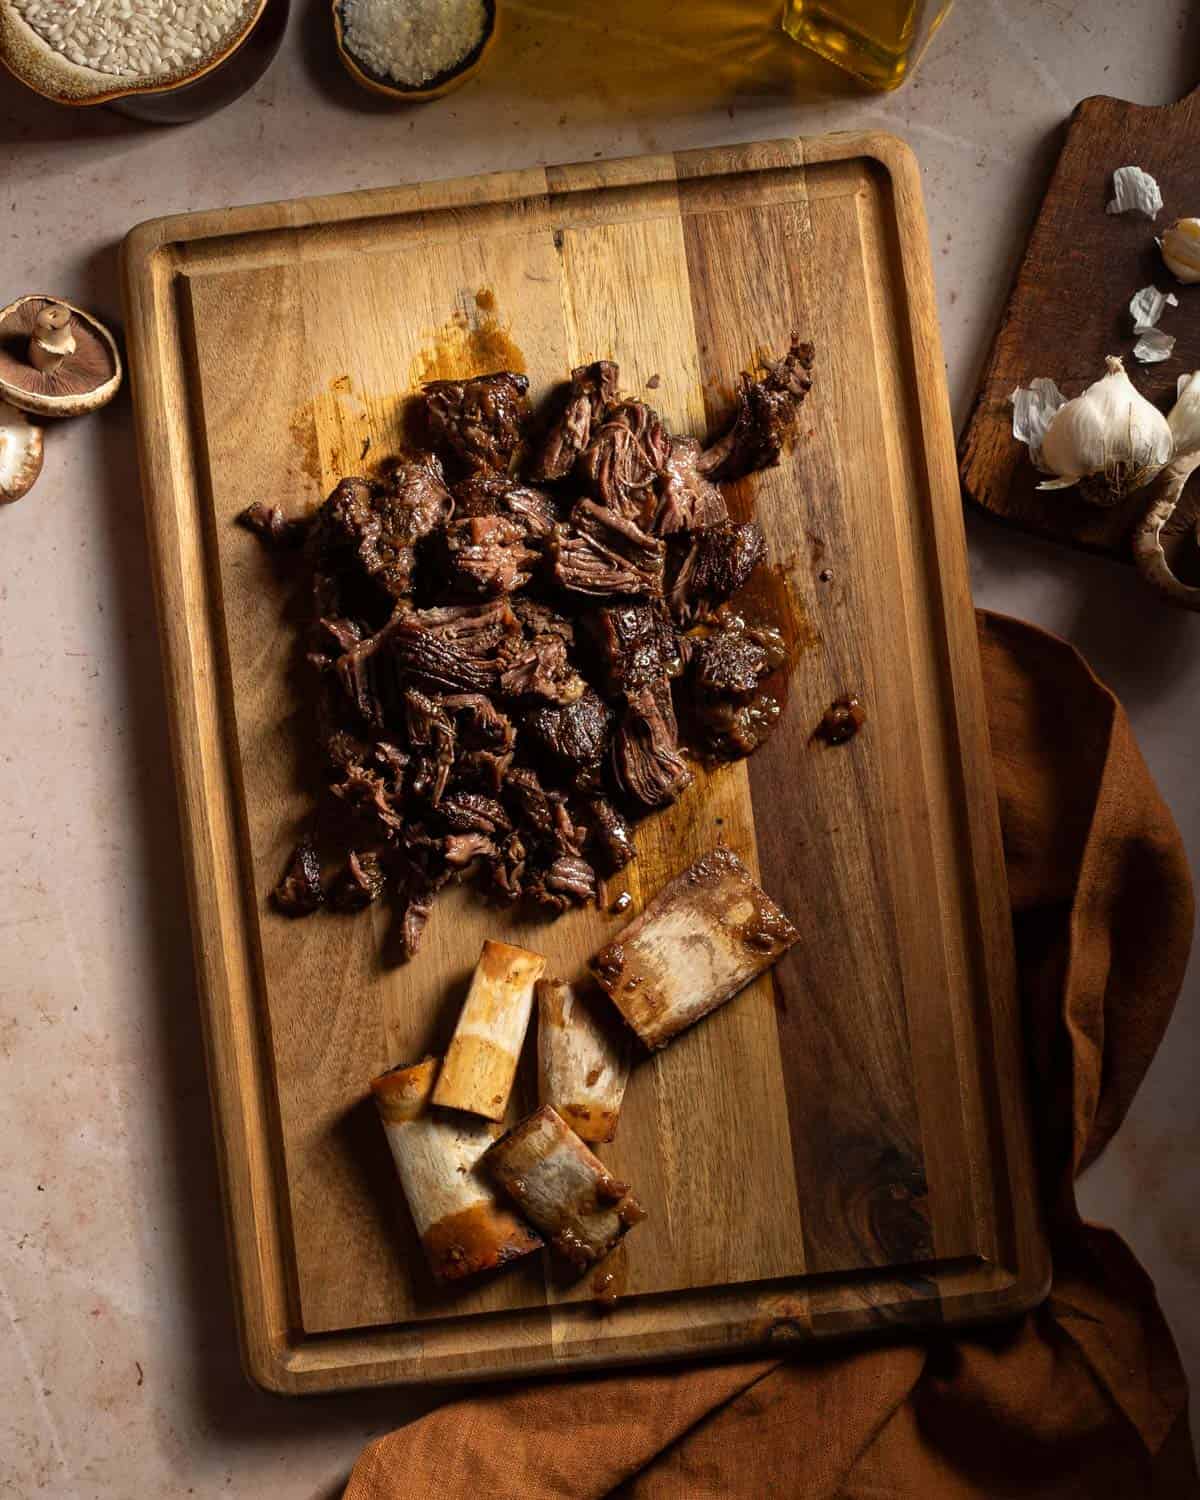 Chopped up braised short ribs on a cutting board with the bones removed.